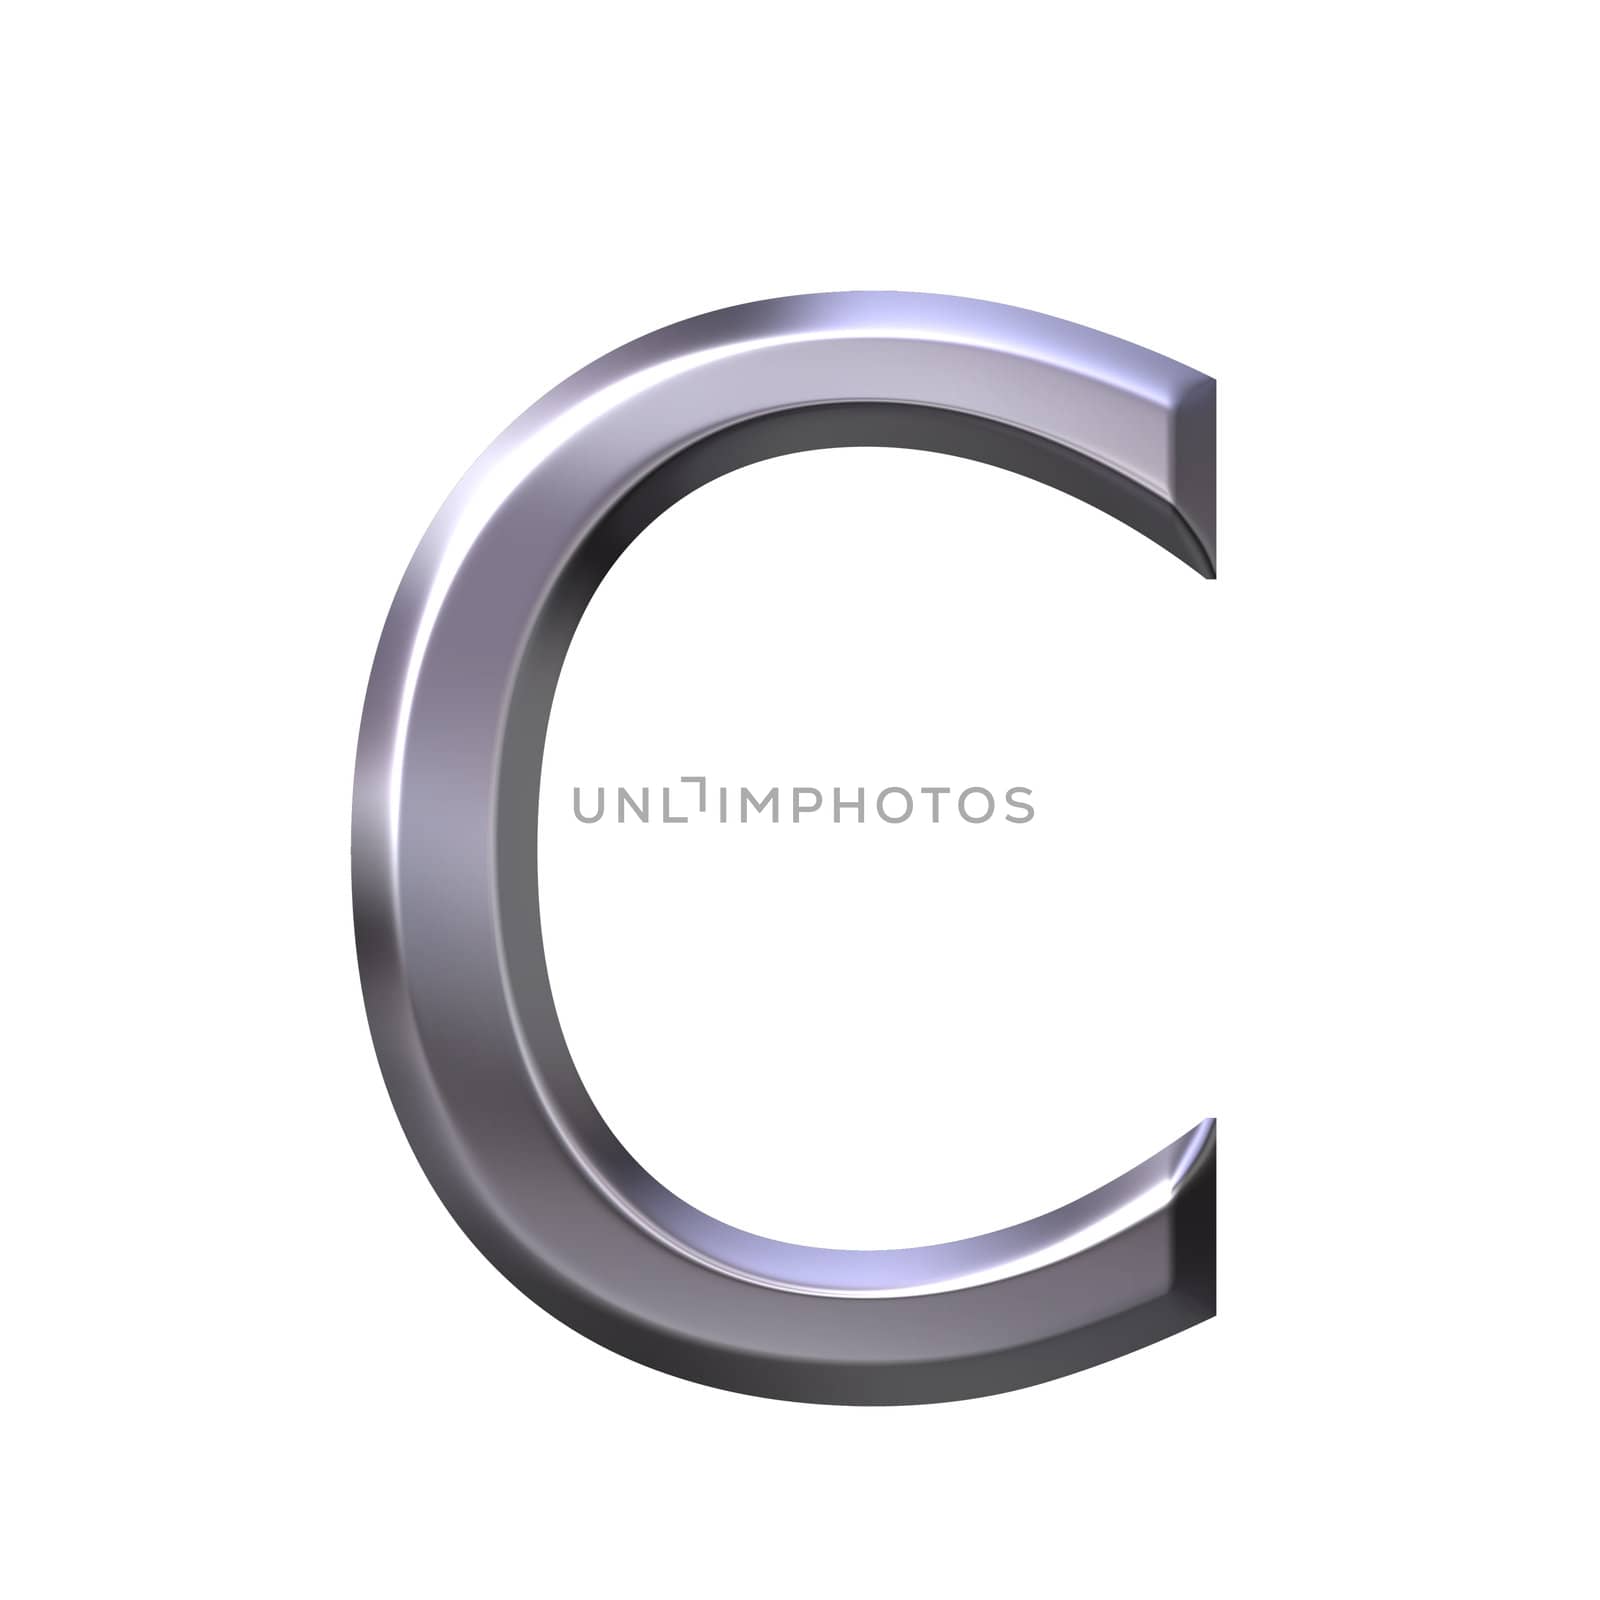 3d silver letter c isolated in white